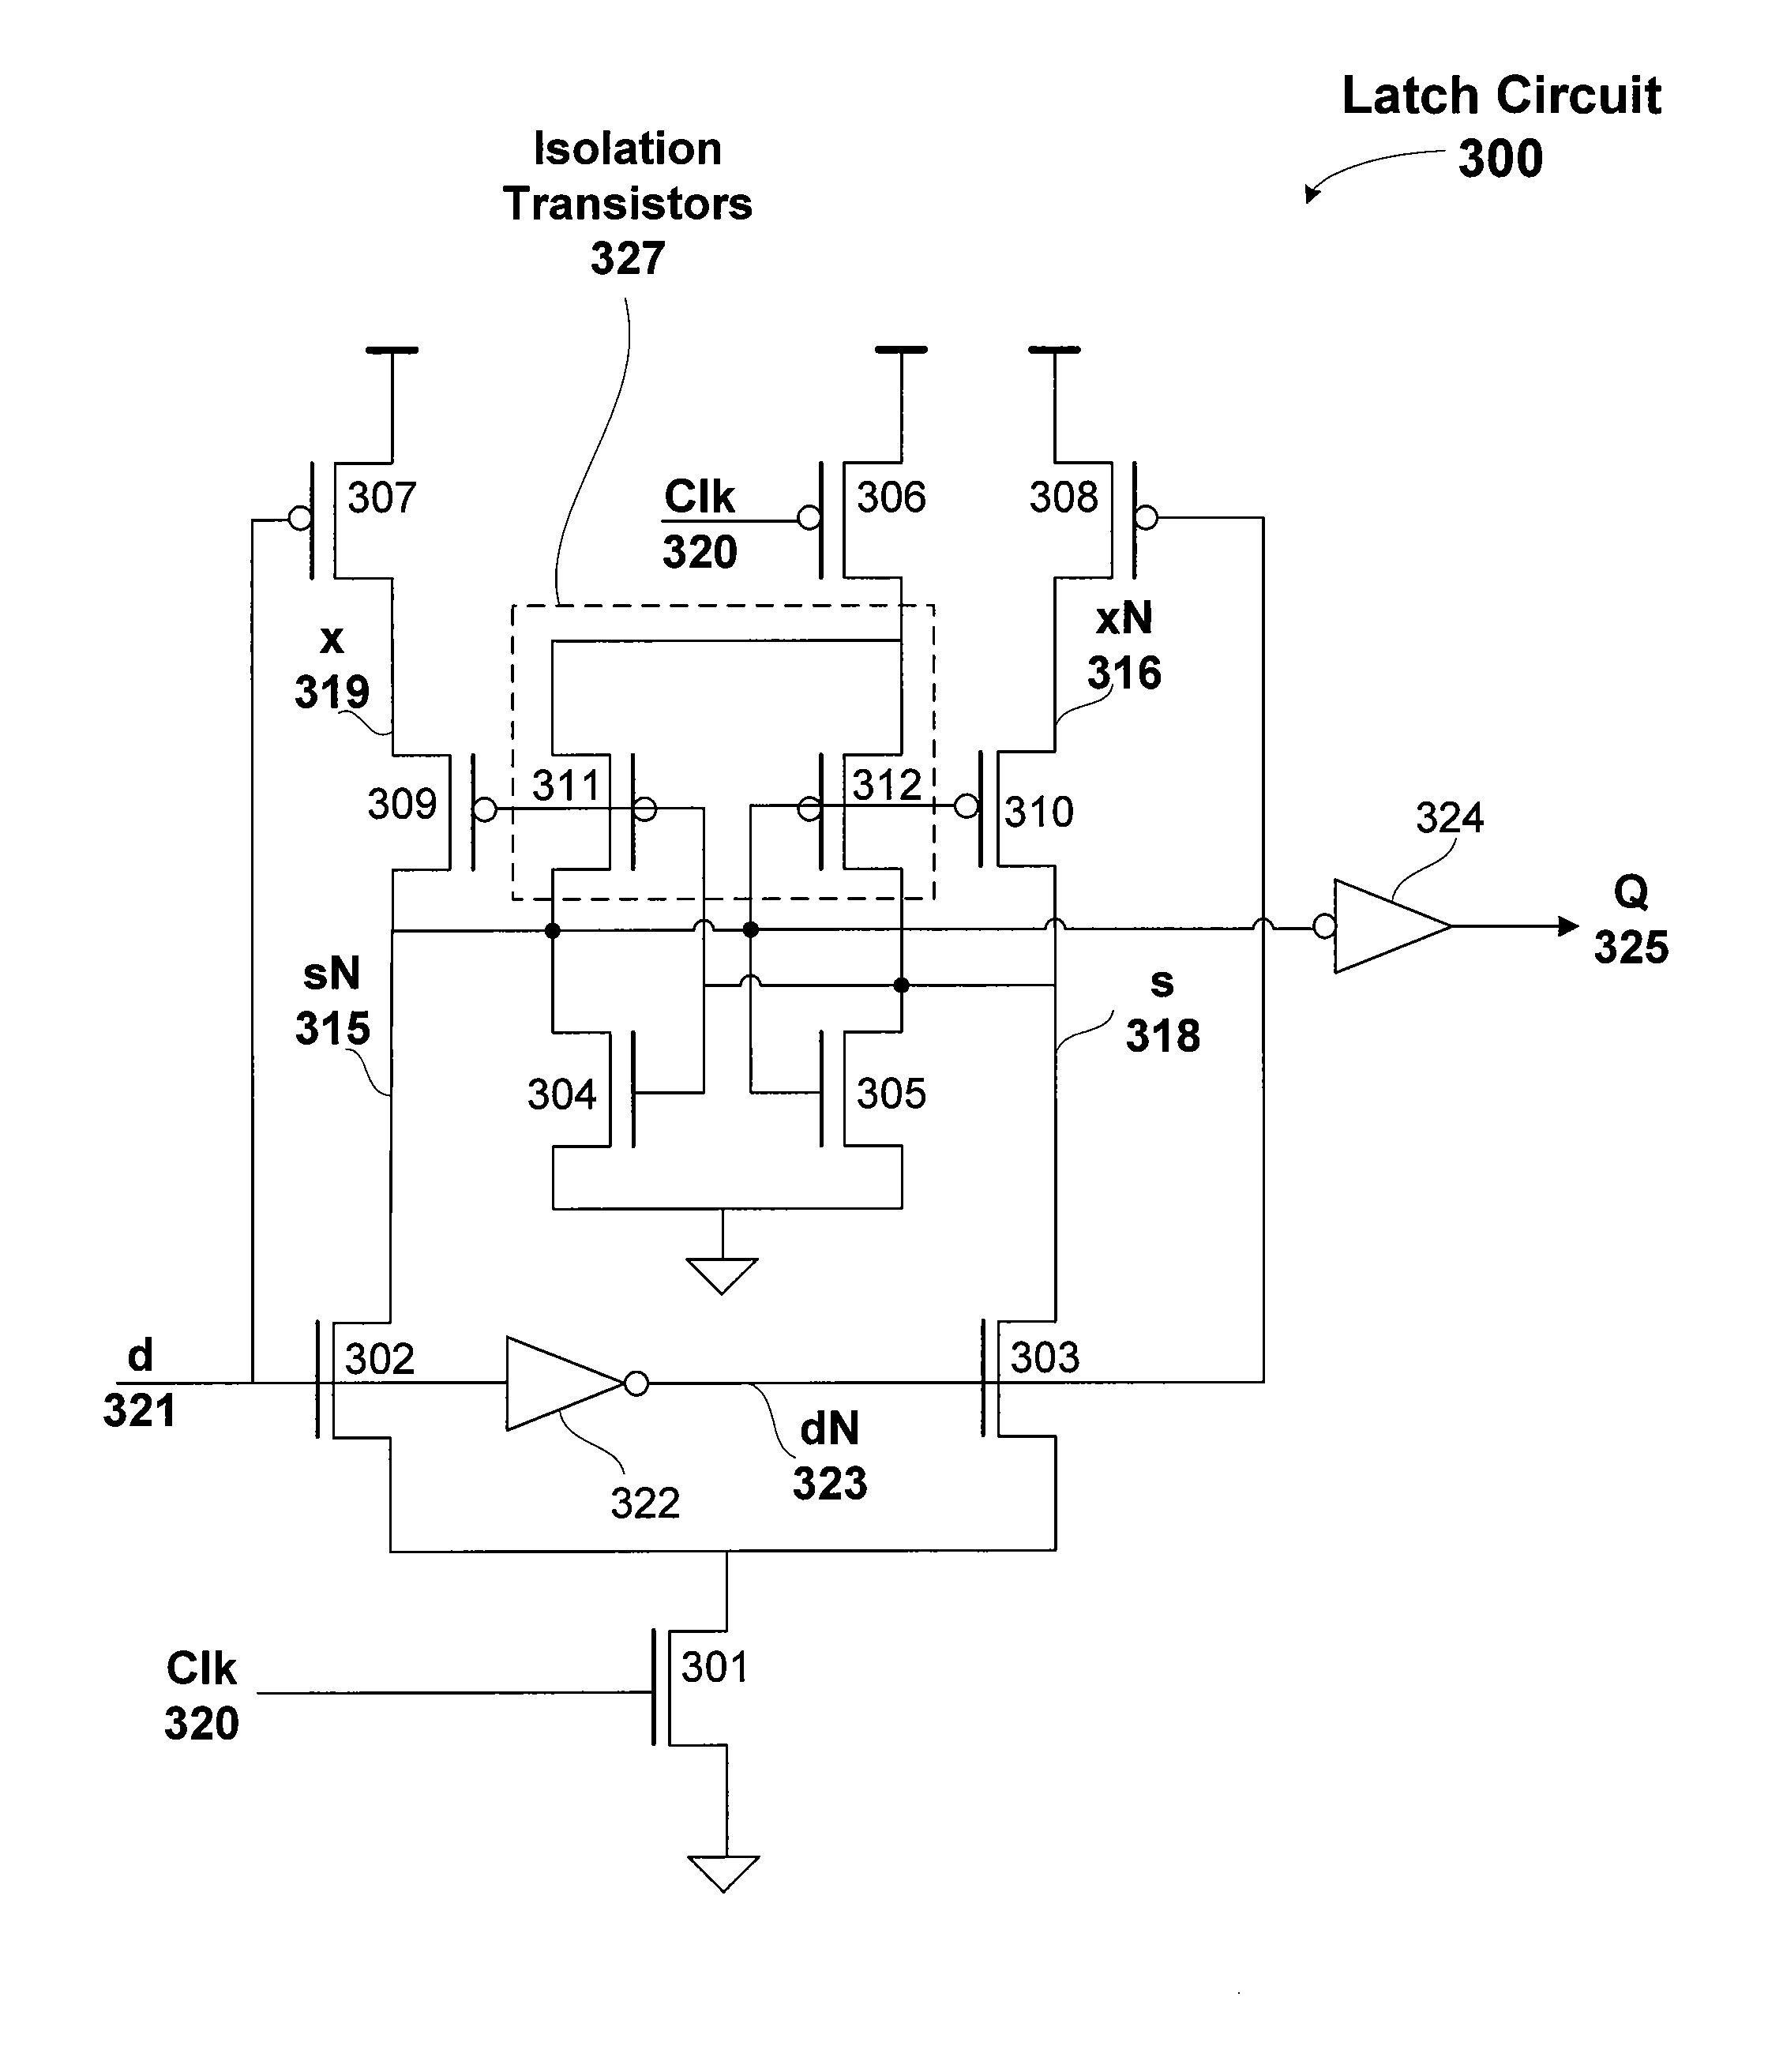 Low-clock-energy, fully-static latch circuit